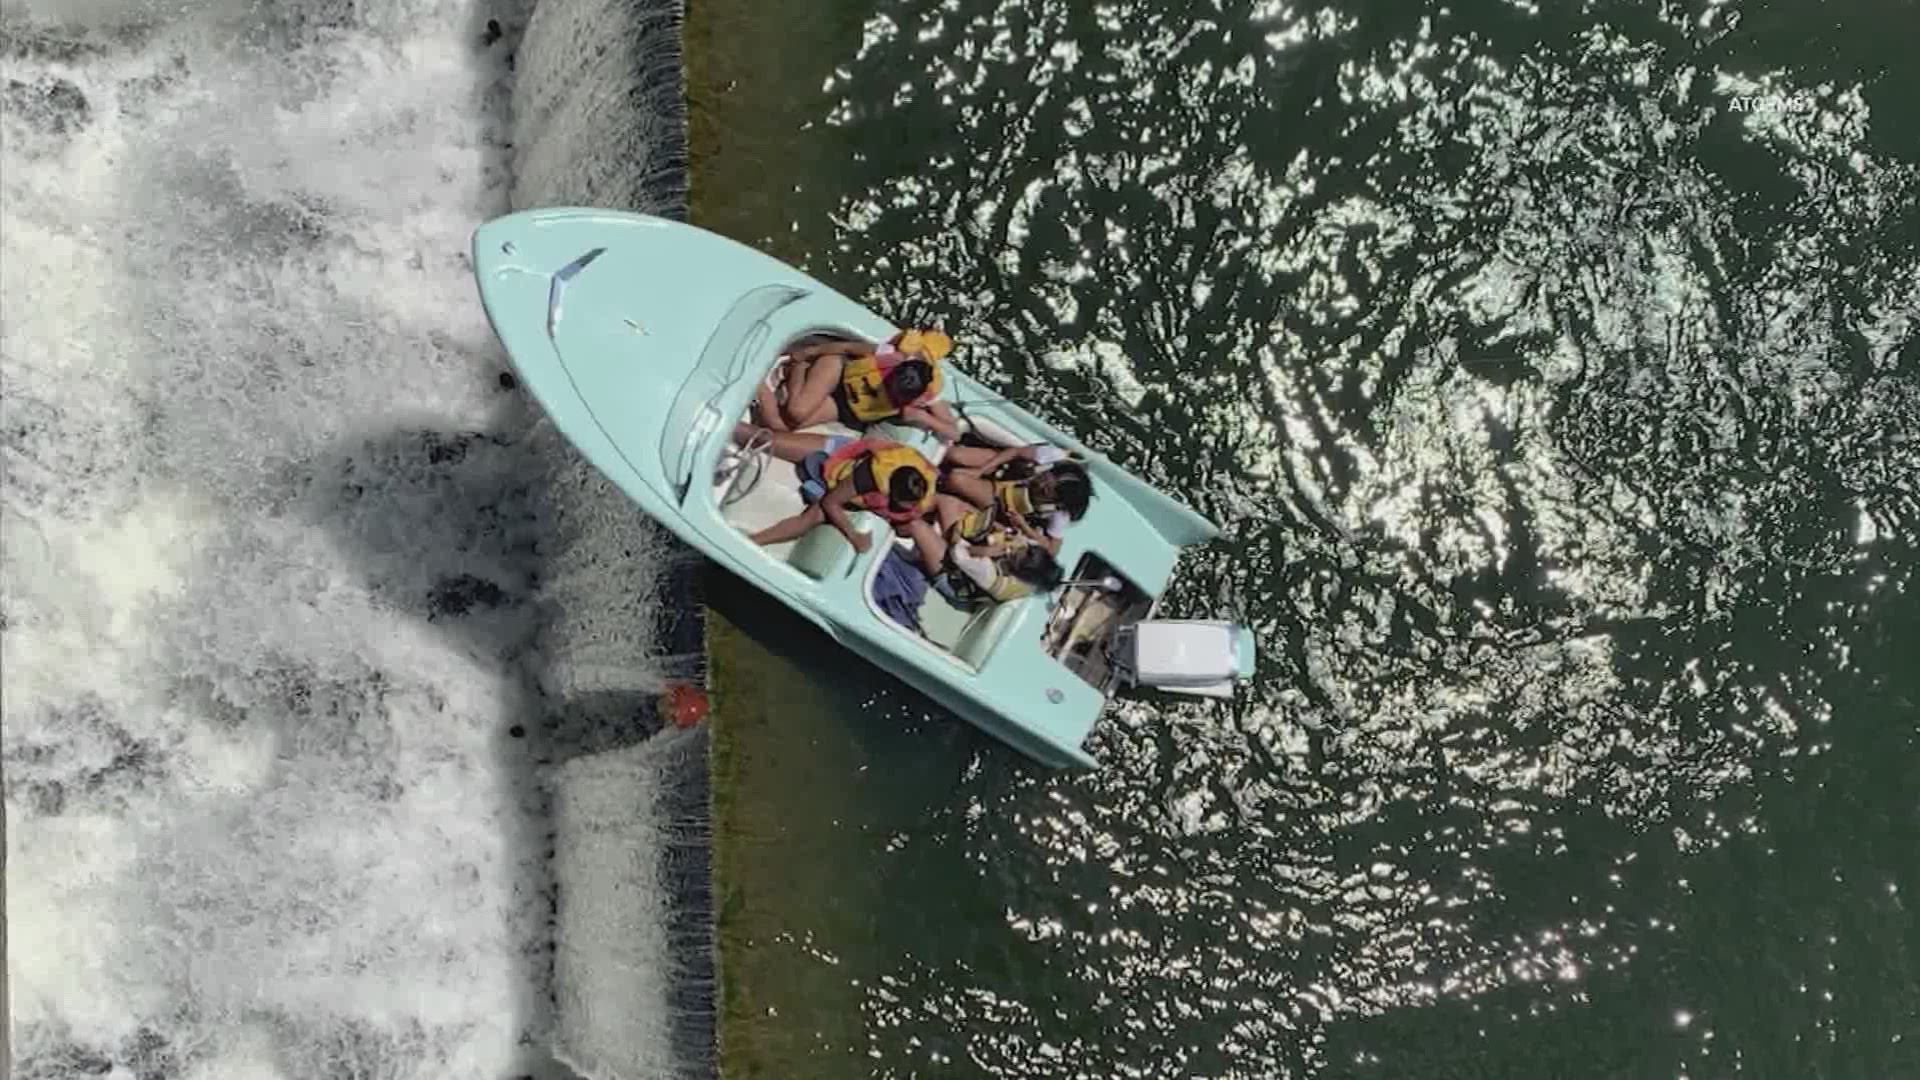 First responders from Austin shared the dramatic story of rescue when a boat carrying four women nearly went over Longhorn Dam on Lake Lady Bird.